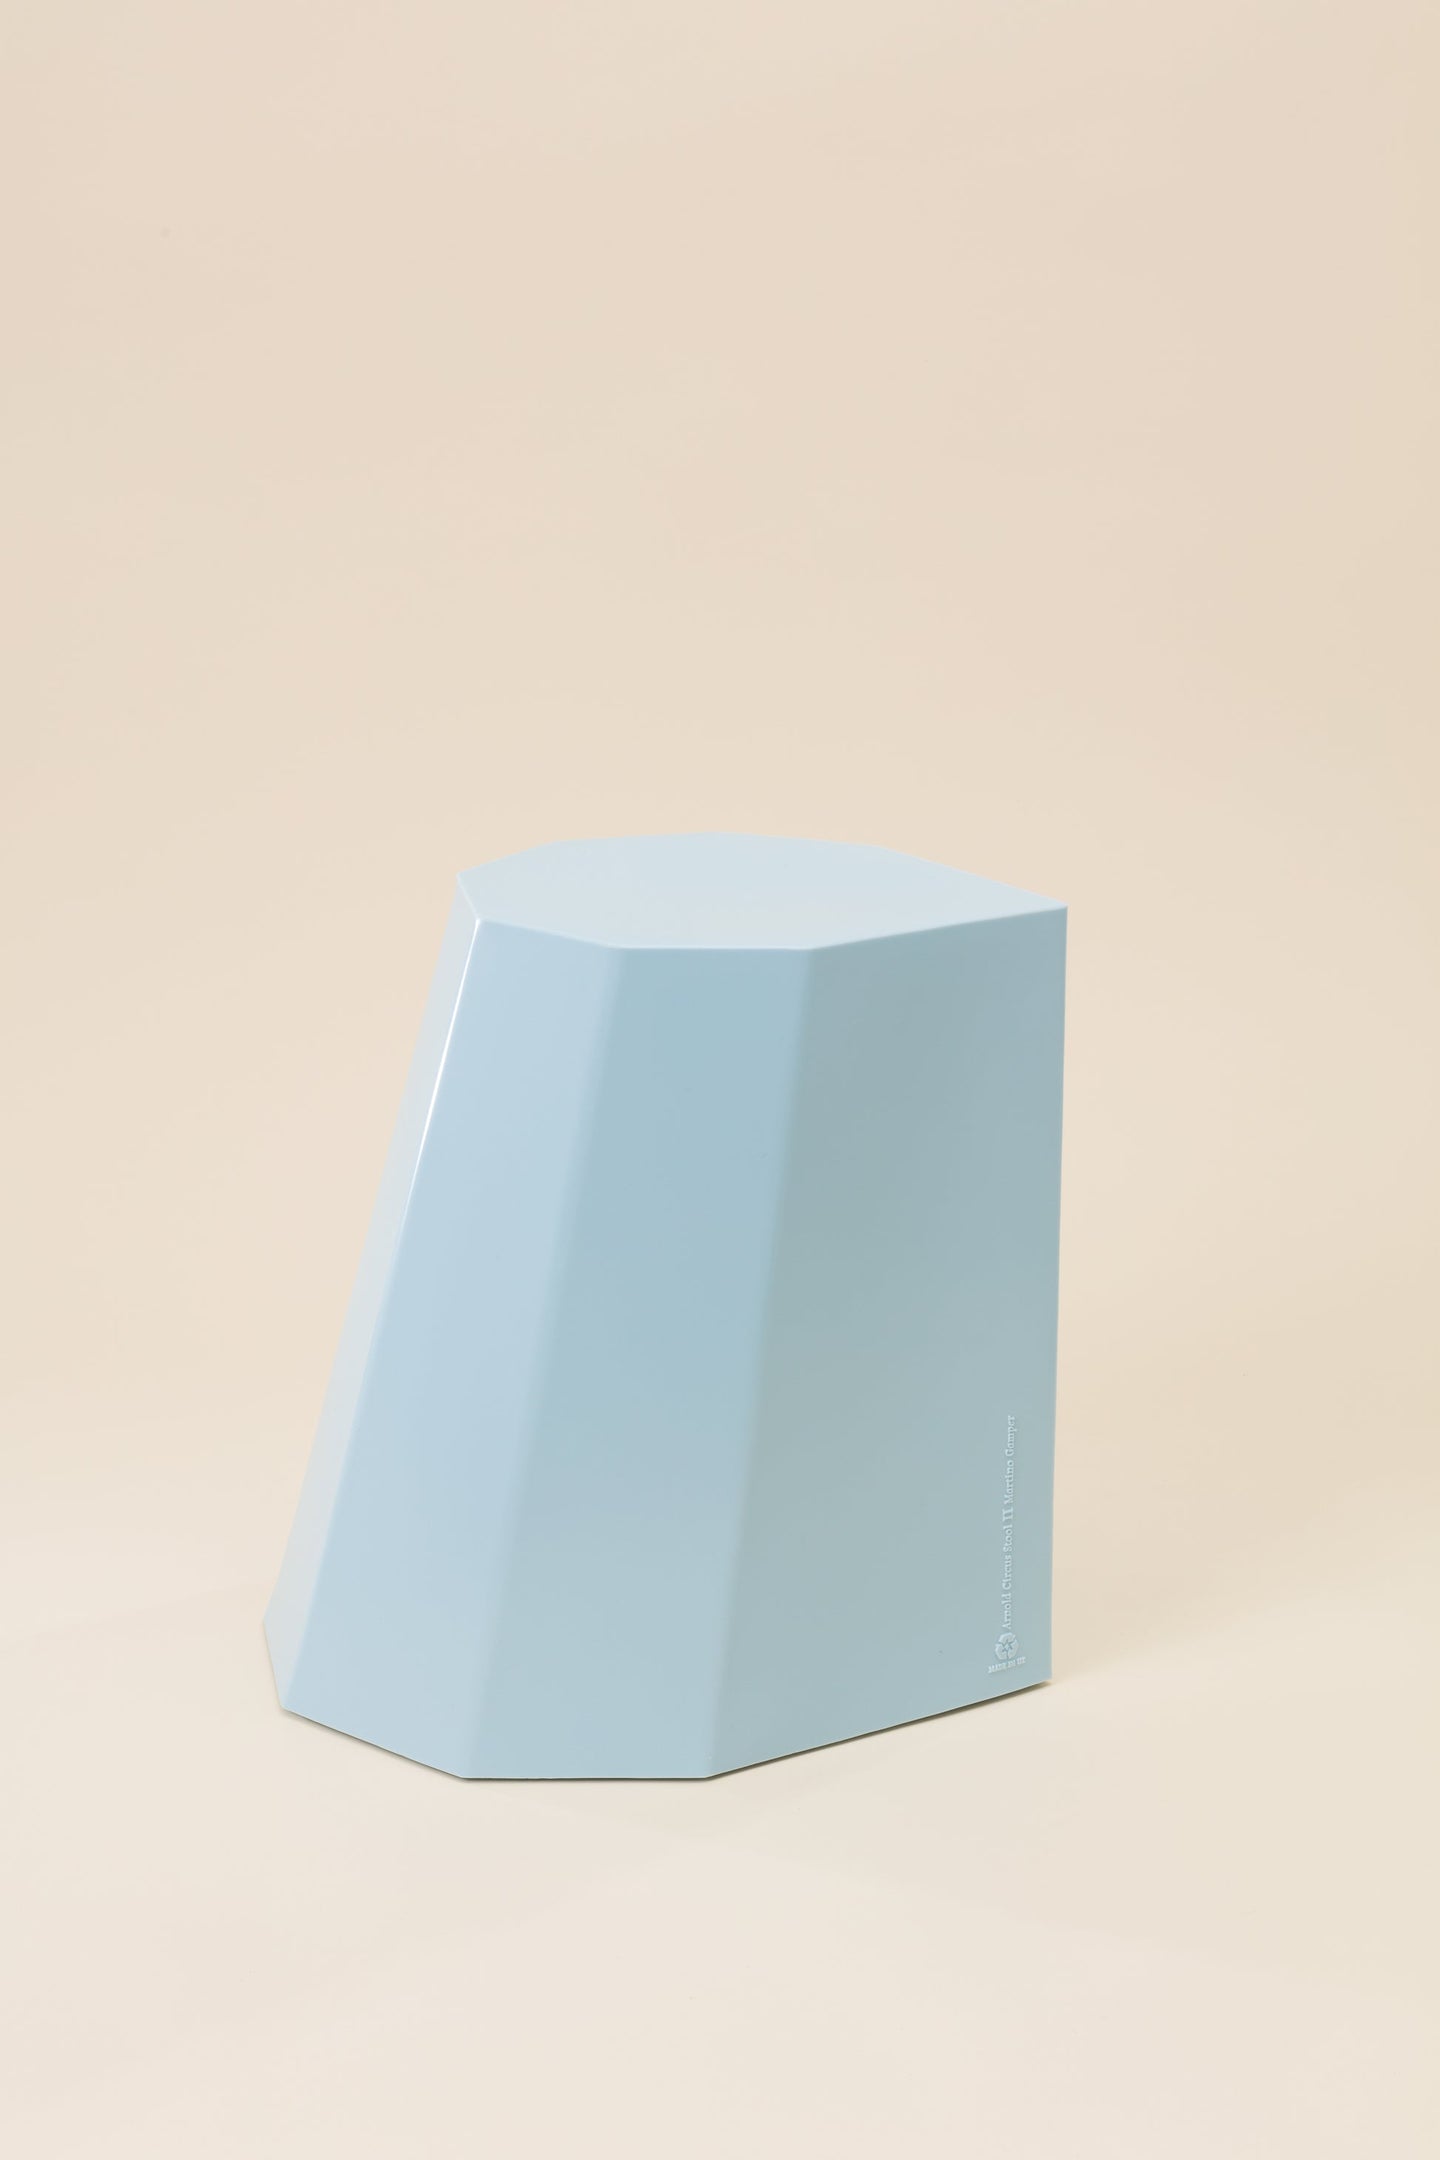 Arnold Circus Stool by Martino Gamper - Baby Blue